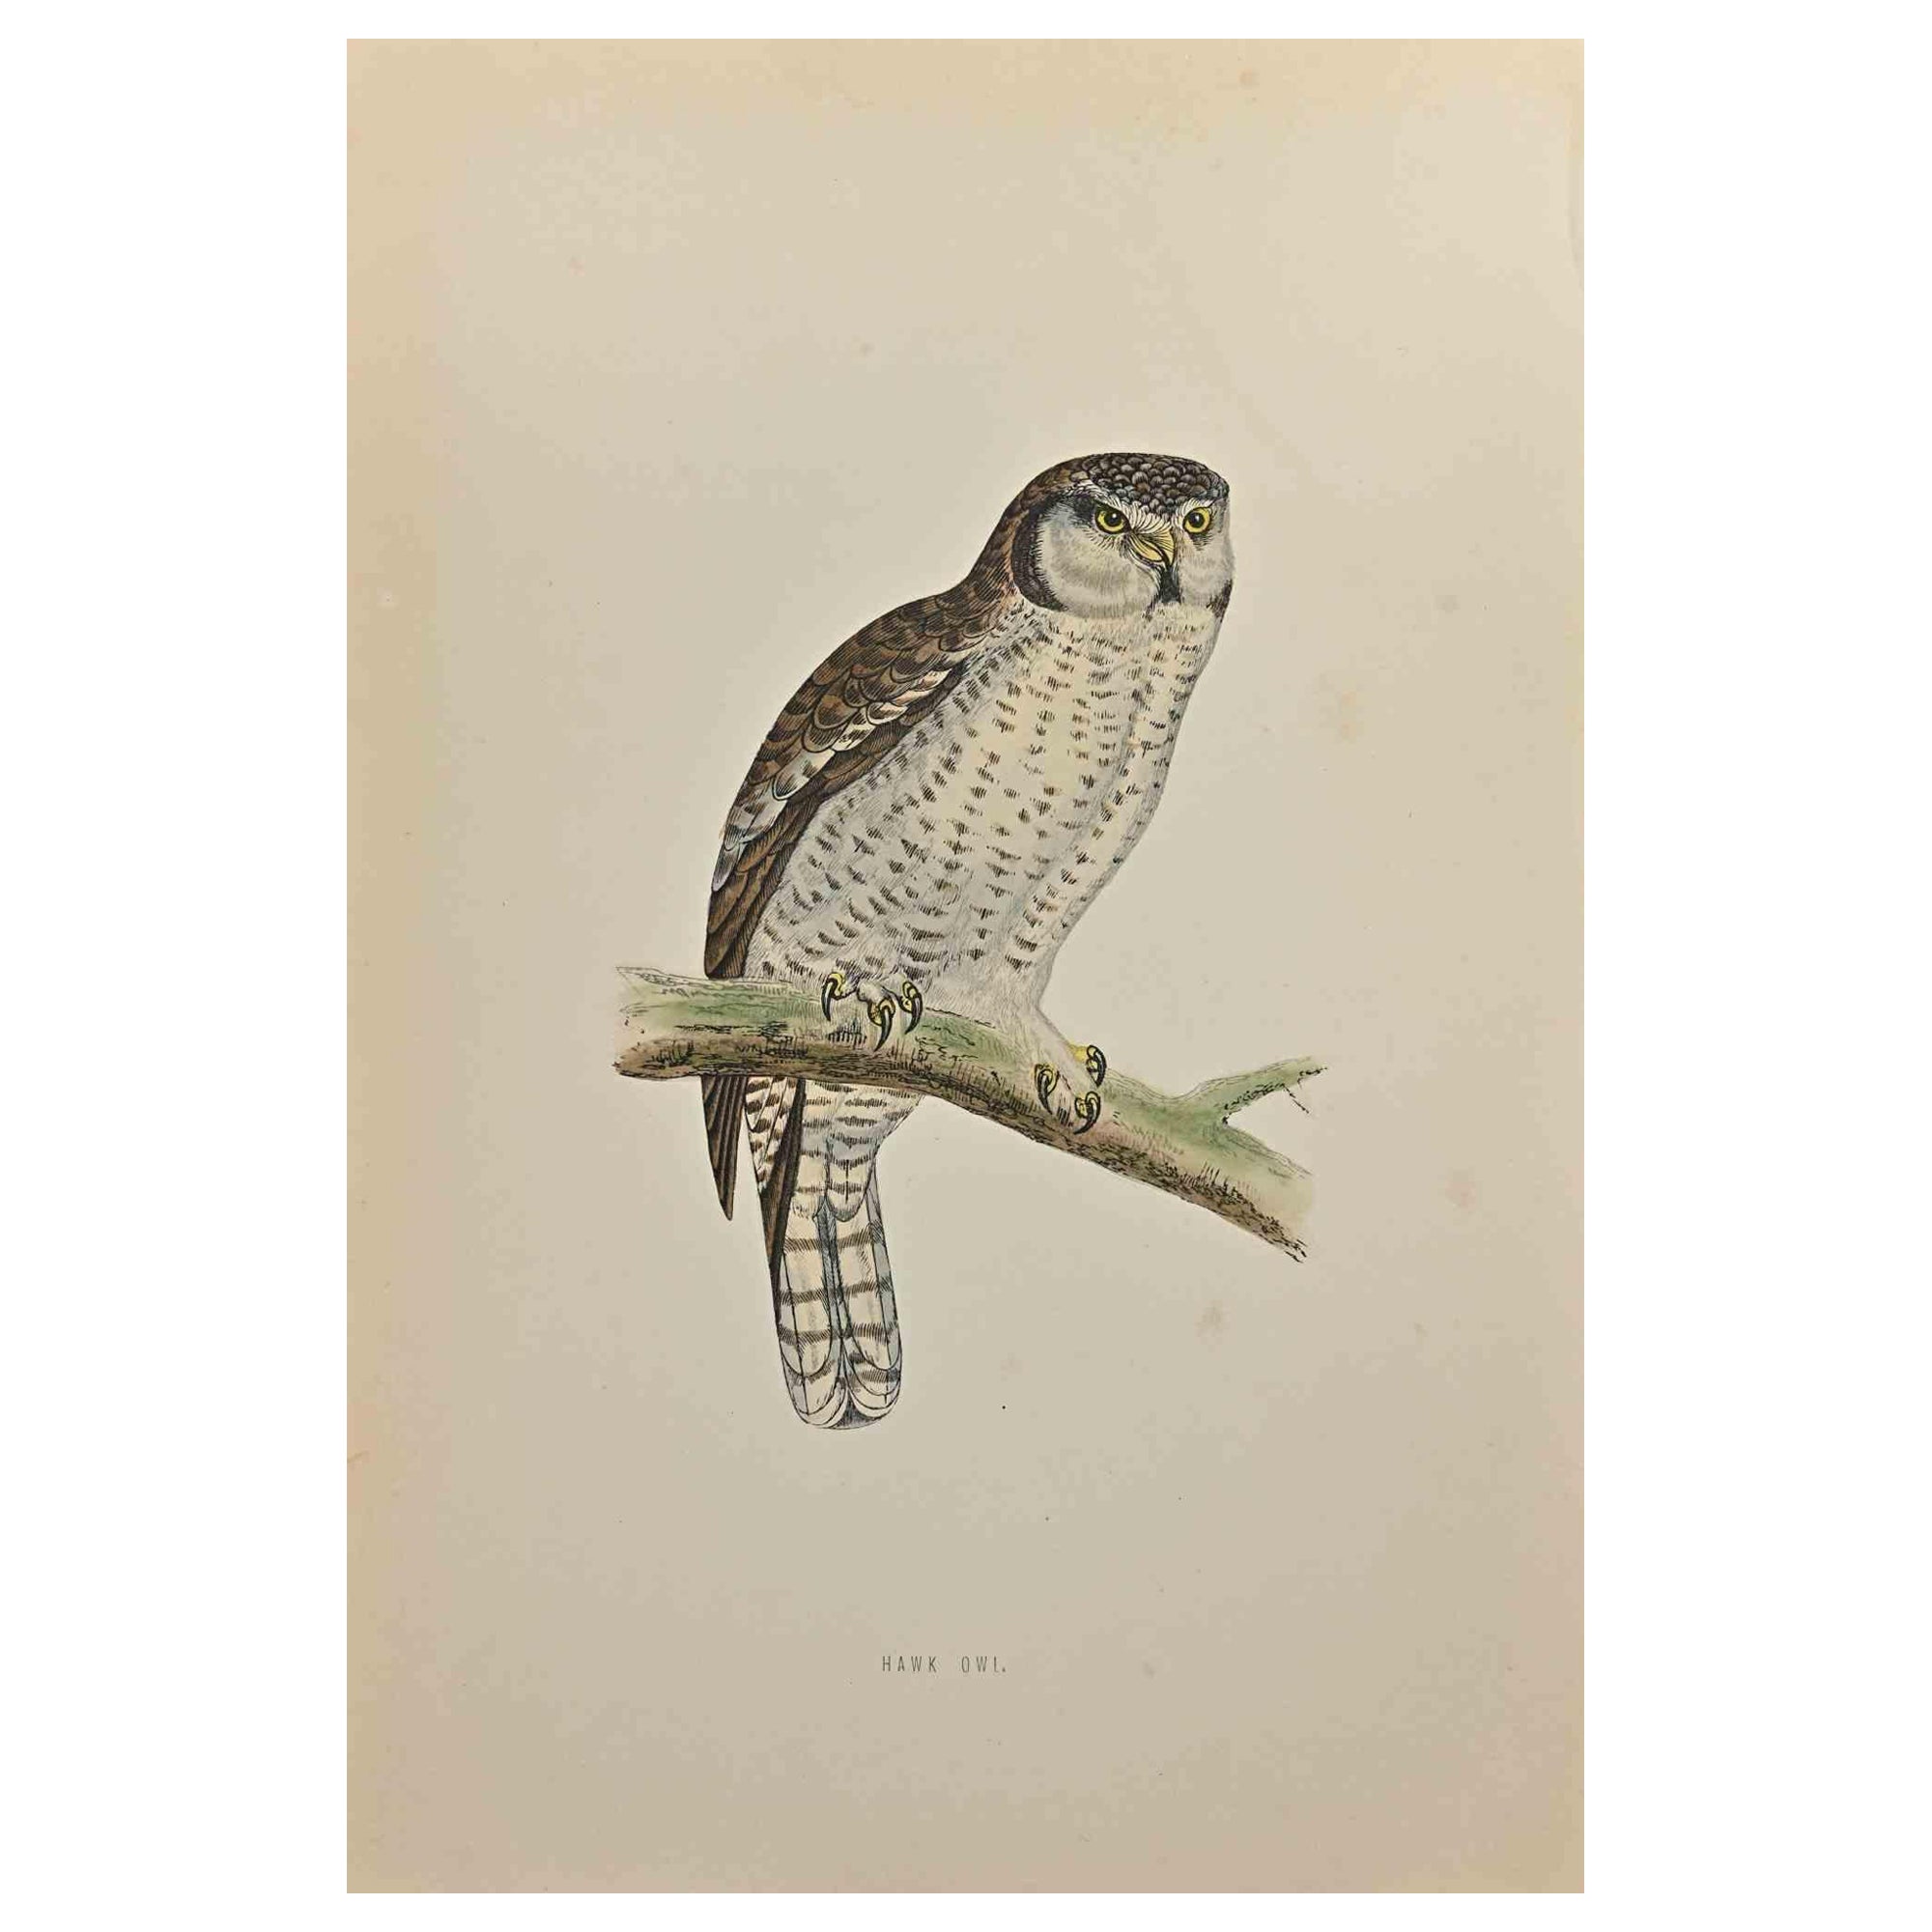  Hawk Owl is a modern artwork realized in 1870 by the British artist Alexander Francis Lydon (1836-1917) . 

Woodcut print, hand colored, published by London, Bell & Sons, 1870.  Name of the bird printed in plate. This work is part of a print suite